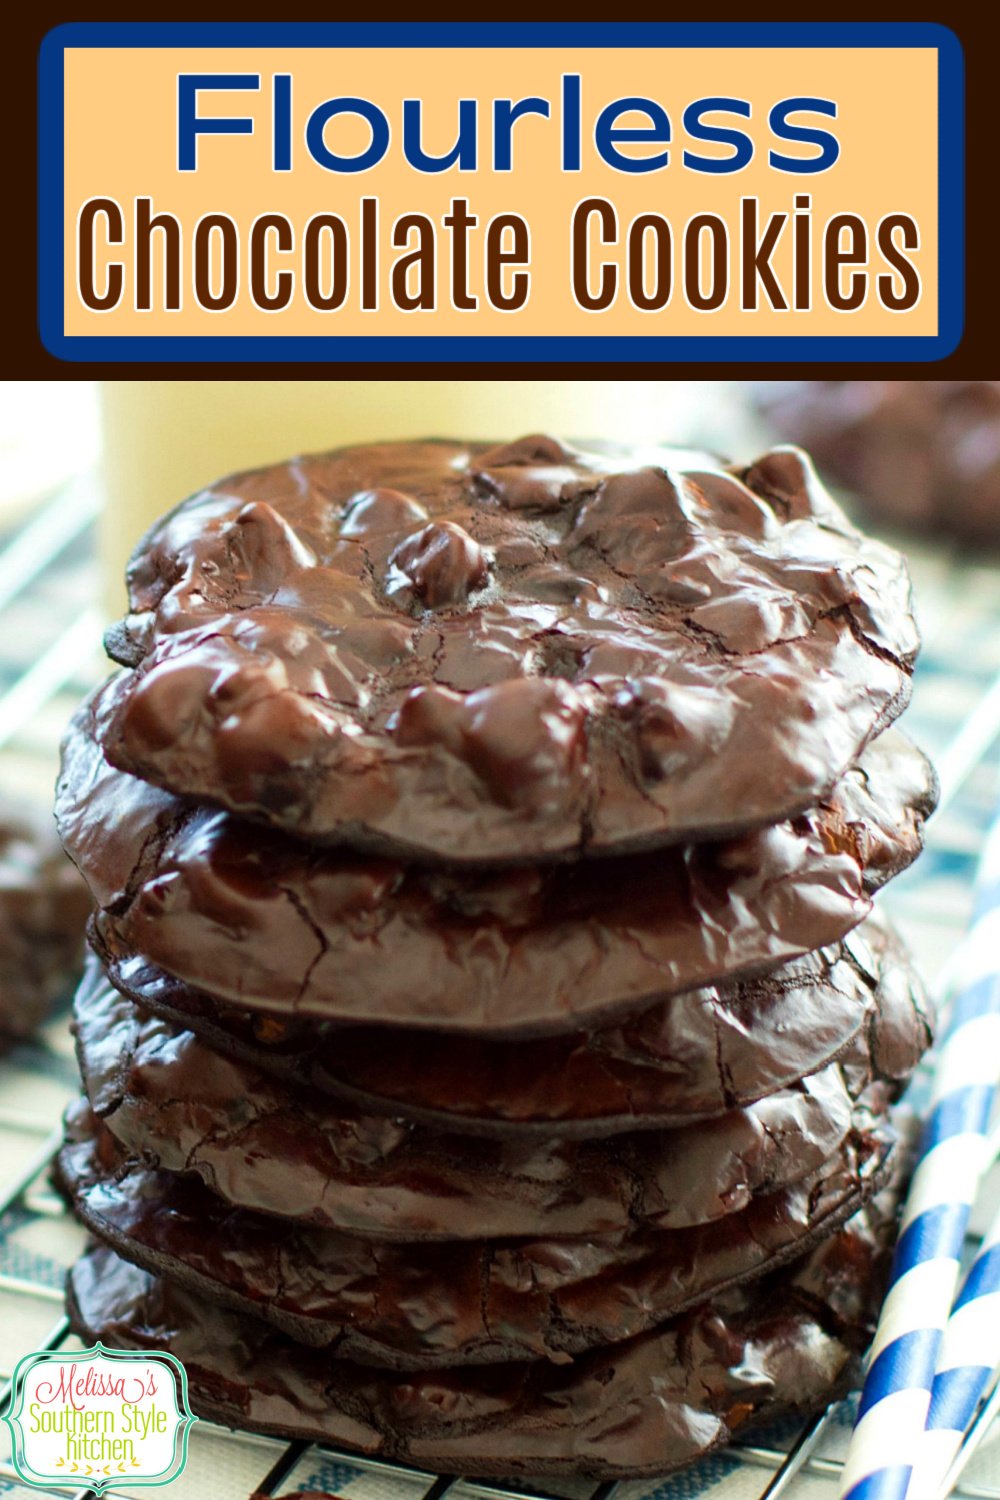 Rich and fudgy Flourless Chocolate Cookies! #chocolatecookies #glutenfreecookies #chocolate #cookierecipes #holidaybaking #holidays #christmascookies #flourlesscookies #desserts #dessertfoodrecipes #southernfood #southernrecipes via @melissasssk